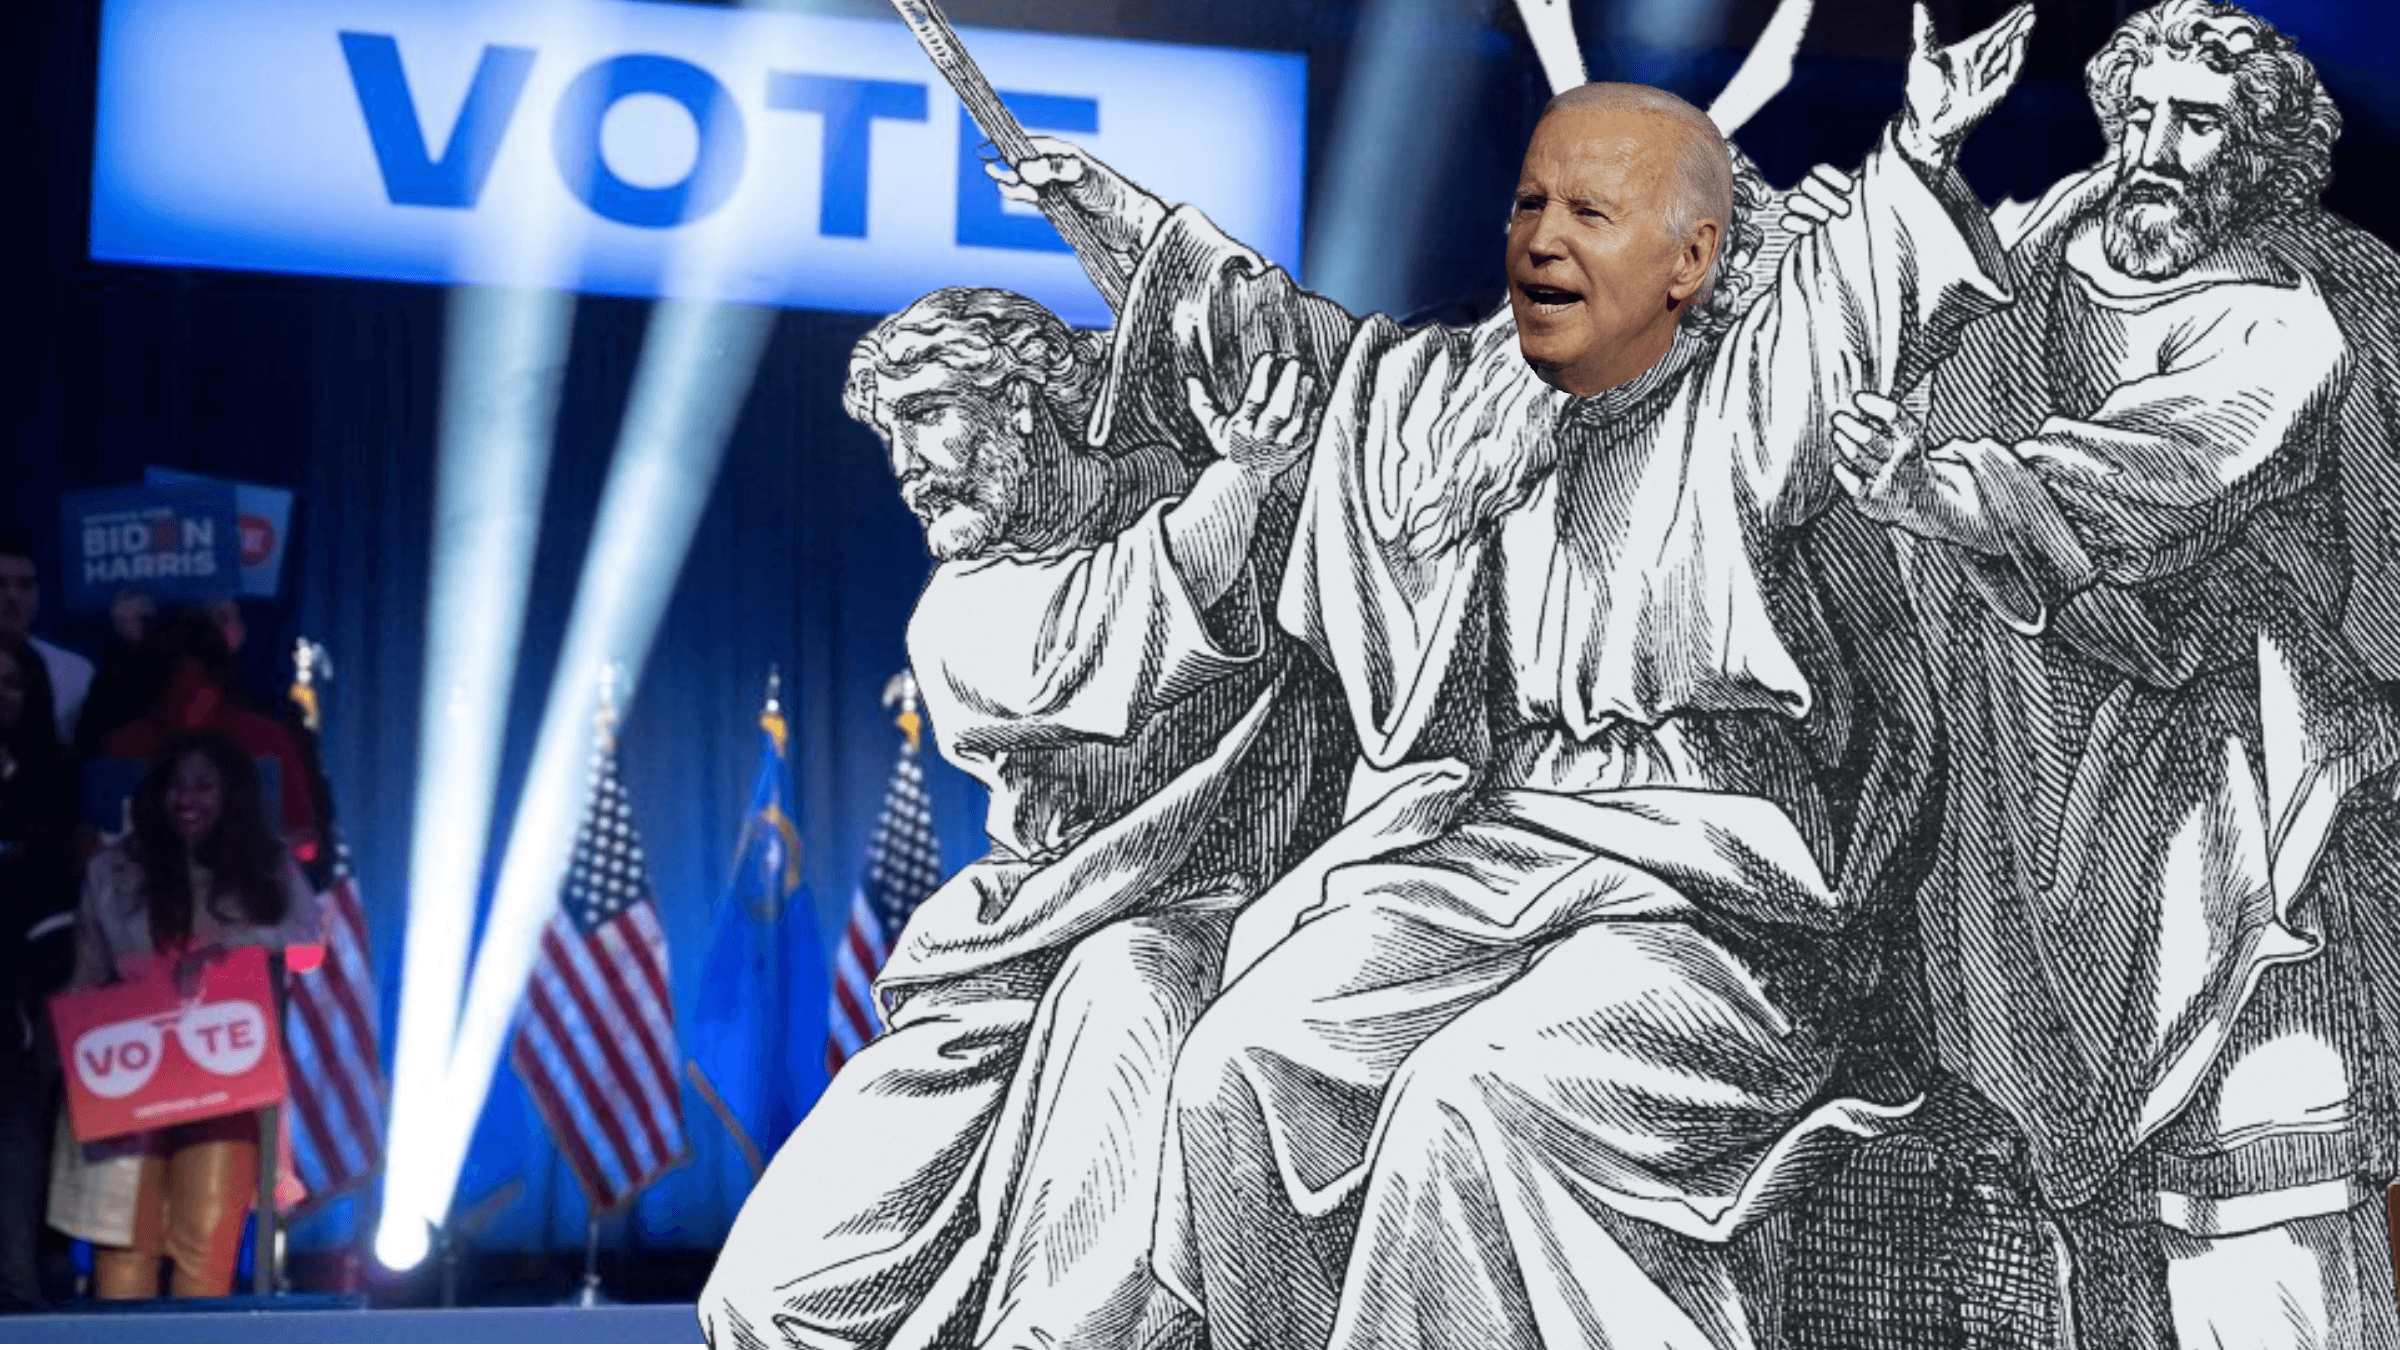 Rabbi Michael S. Beals, who President Joe Biden calls “his rabbi,” said now is the time for Democrats to rally around Biden and hold up his arms, as Aaron and Hur did for Moses while Joshua was battling Amalek.